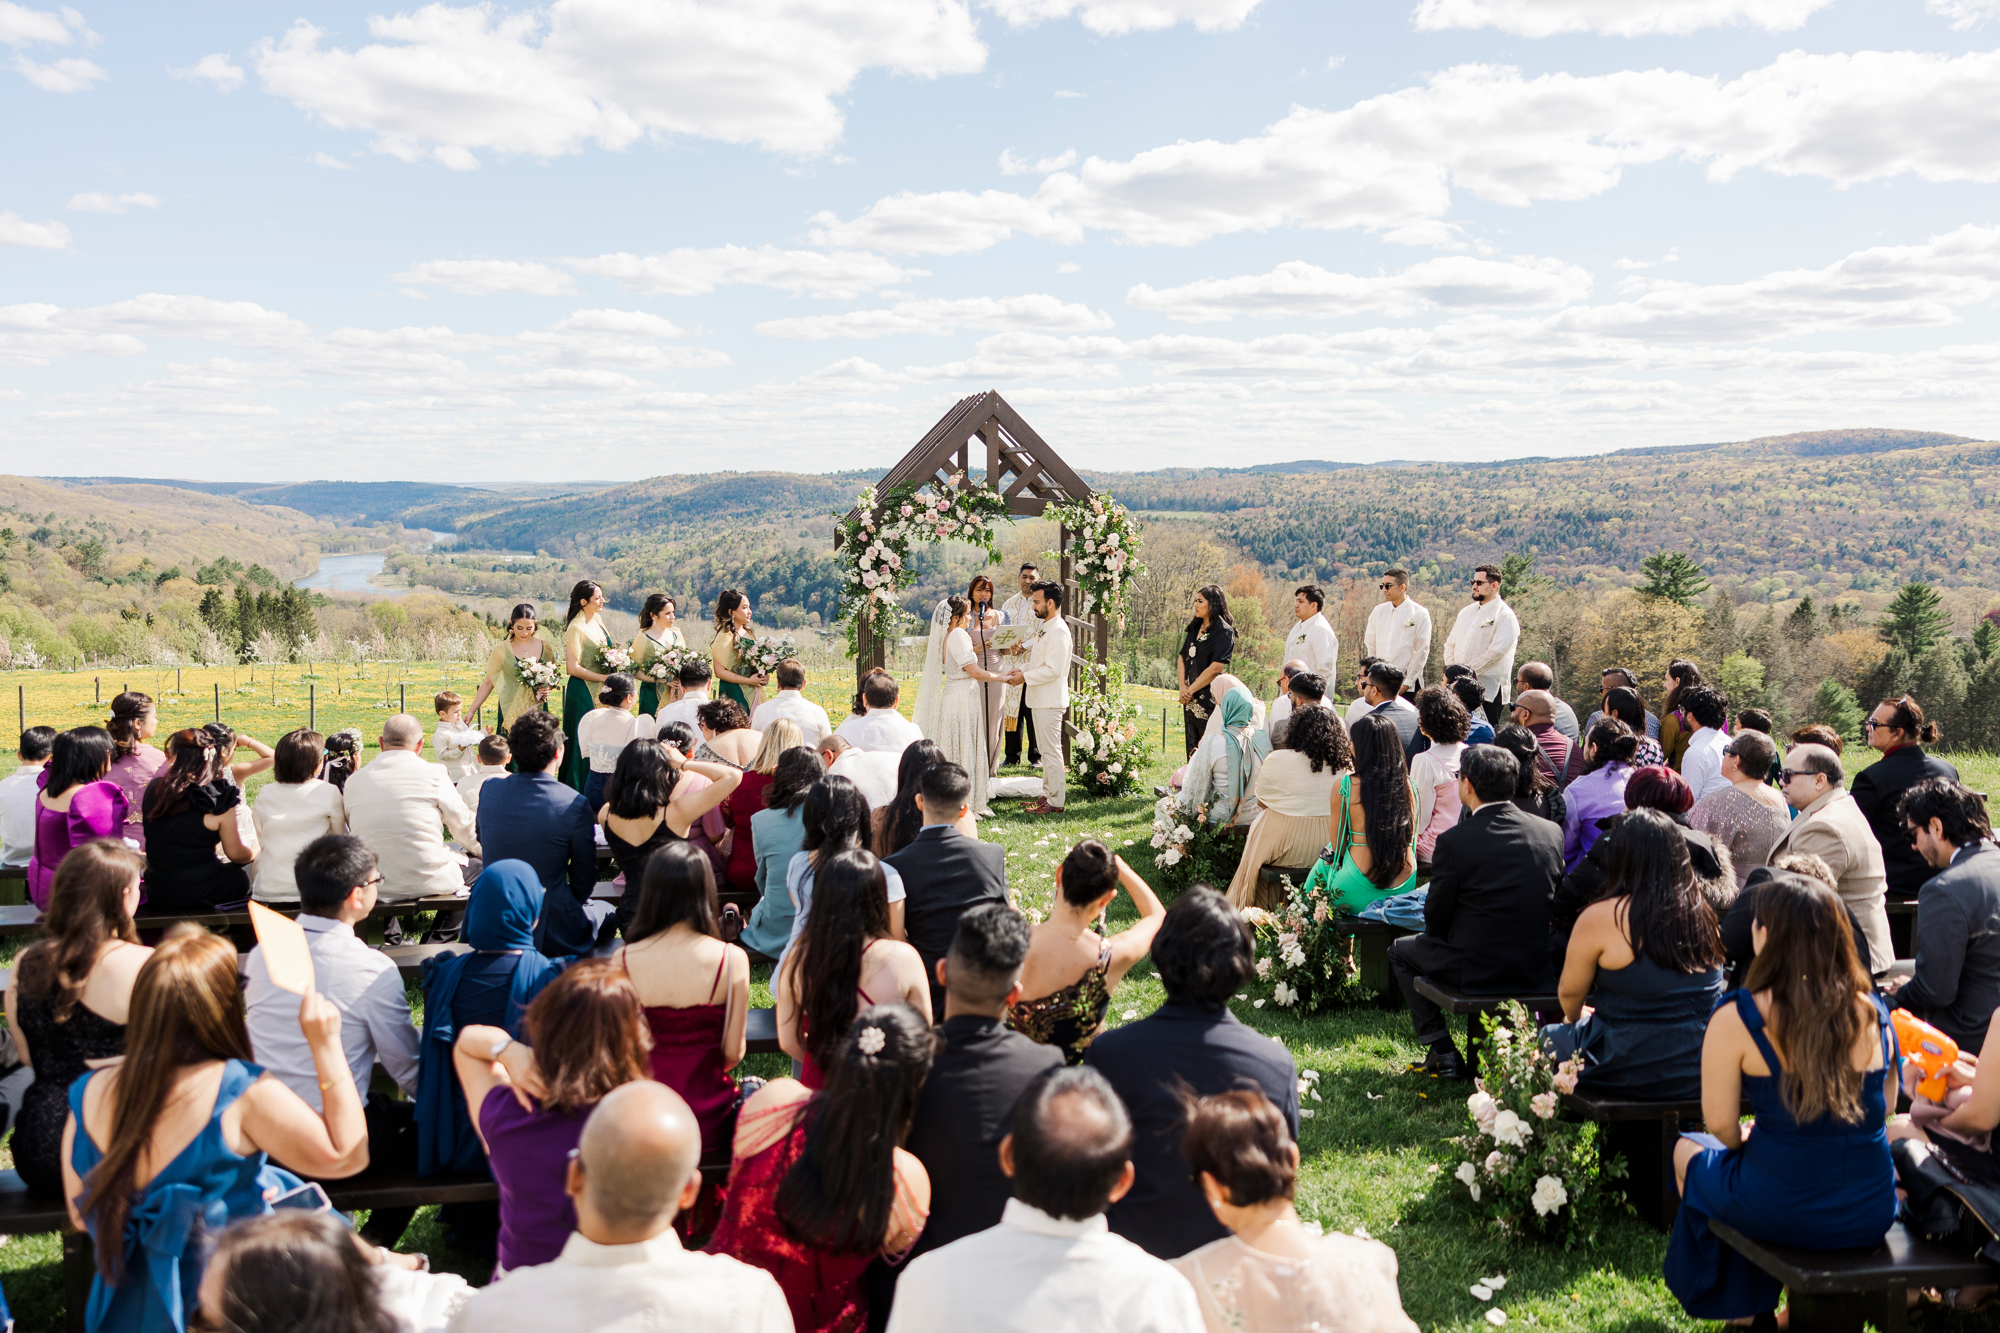 Incredible Seminary Hill Wedding in the Summertime